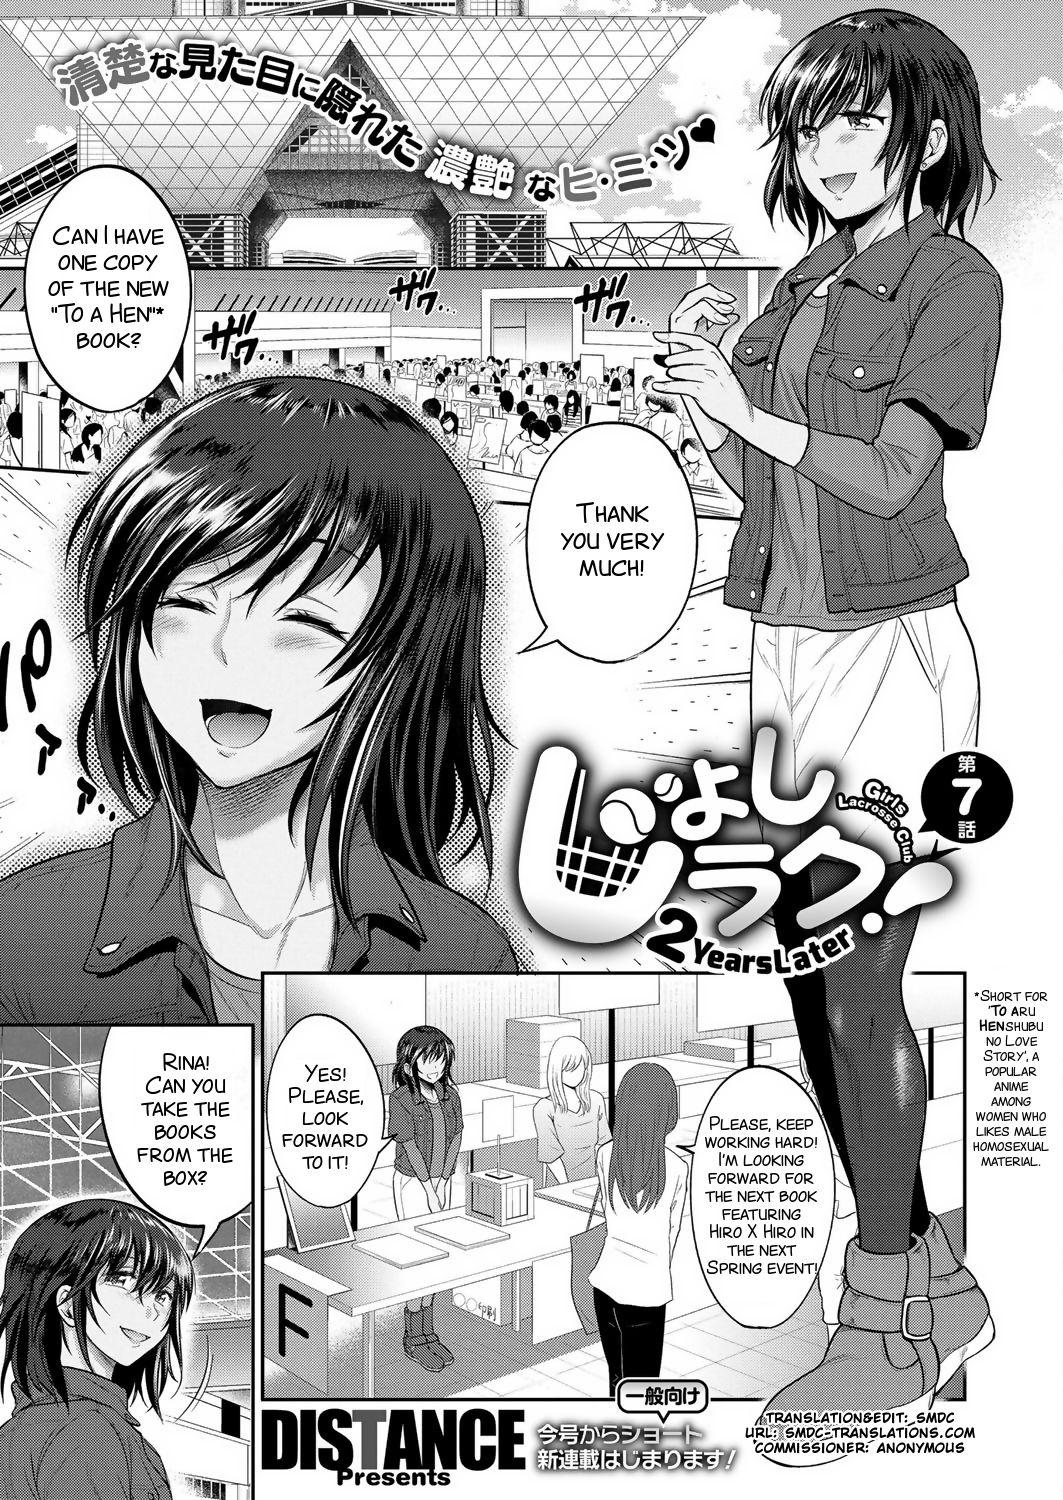 [DISTANCE] Joshi Luck! ~2 Years Later~ Ch. 7-8.5 [English] [SMDC] [Digital] 0